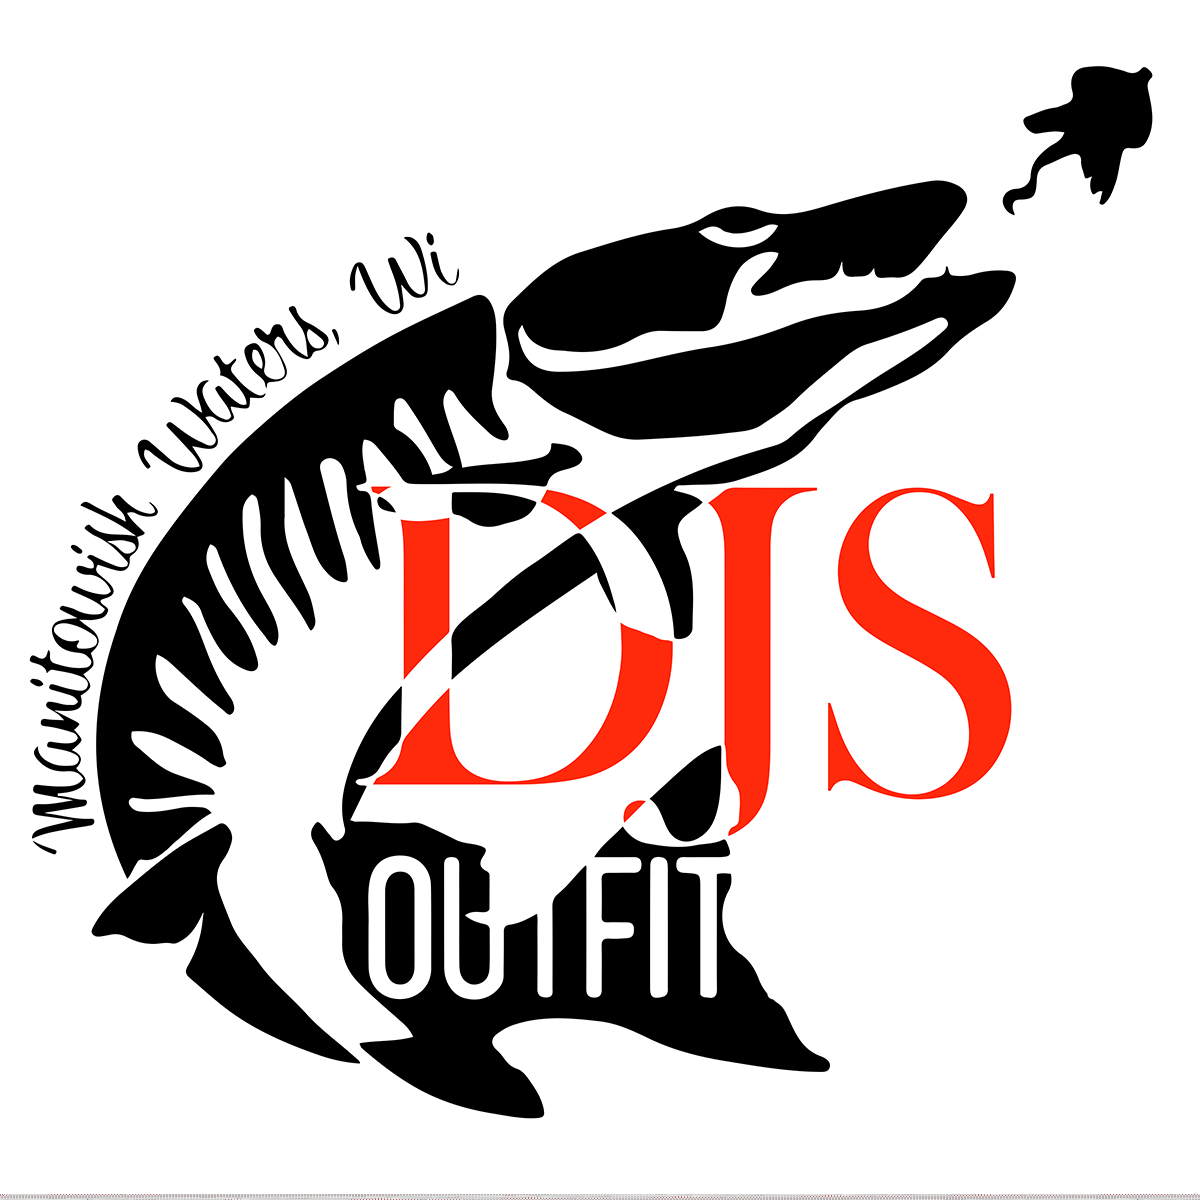 DJS Outfitters